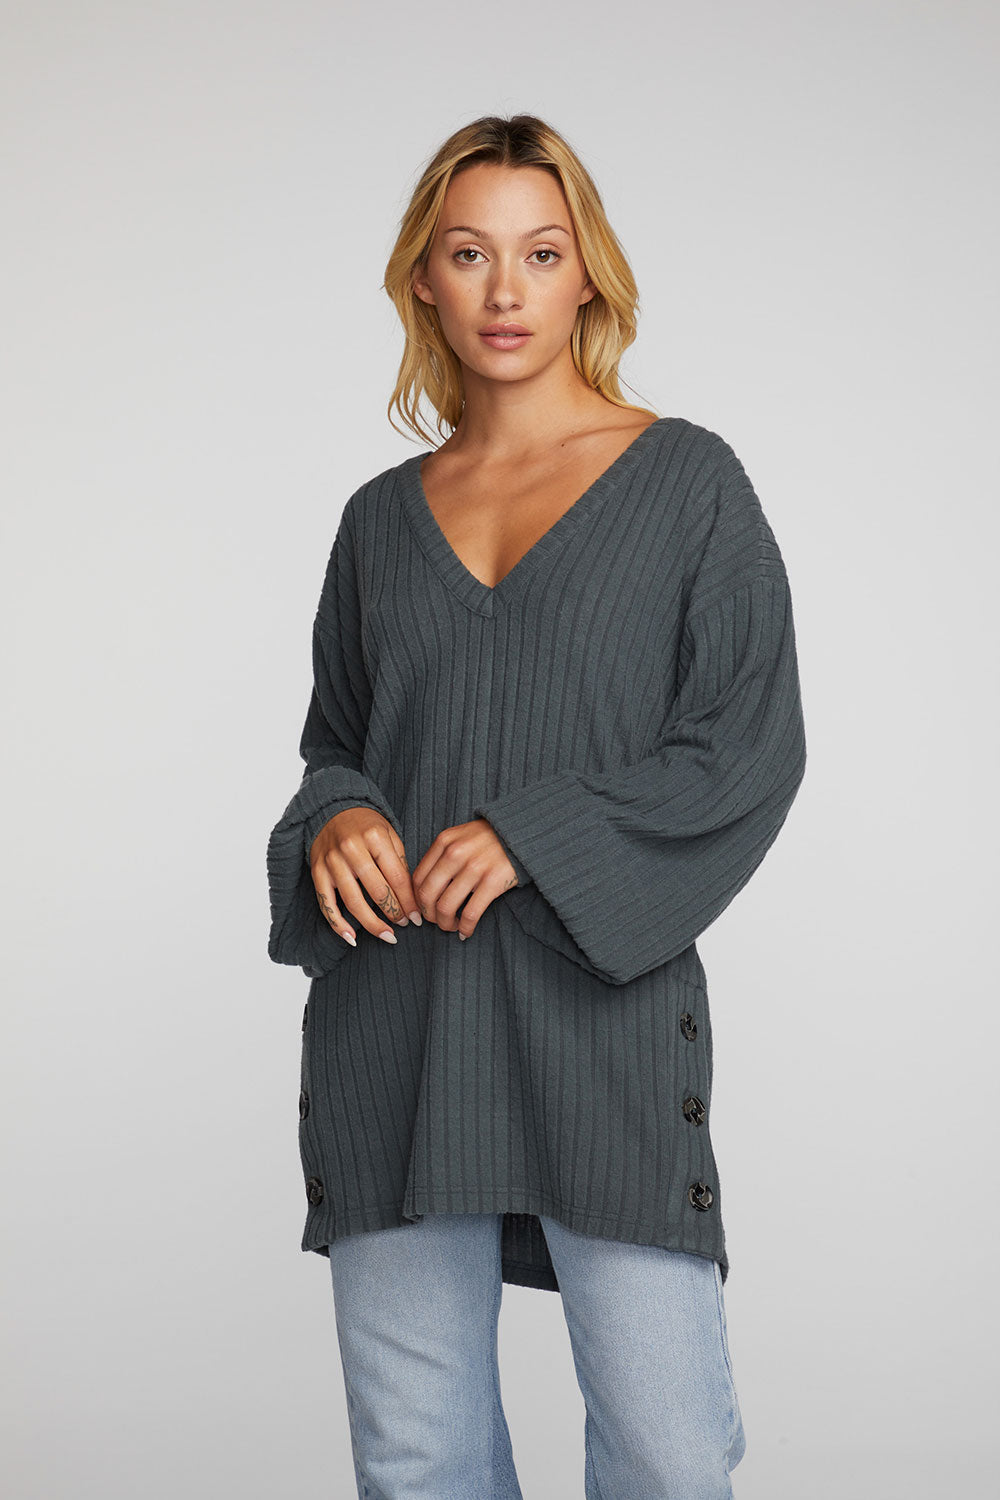 chaser-coda-tunic-charcoal-front